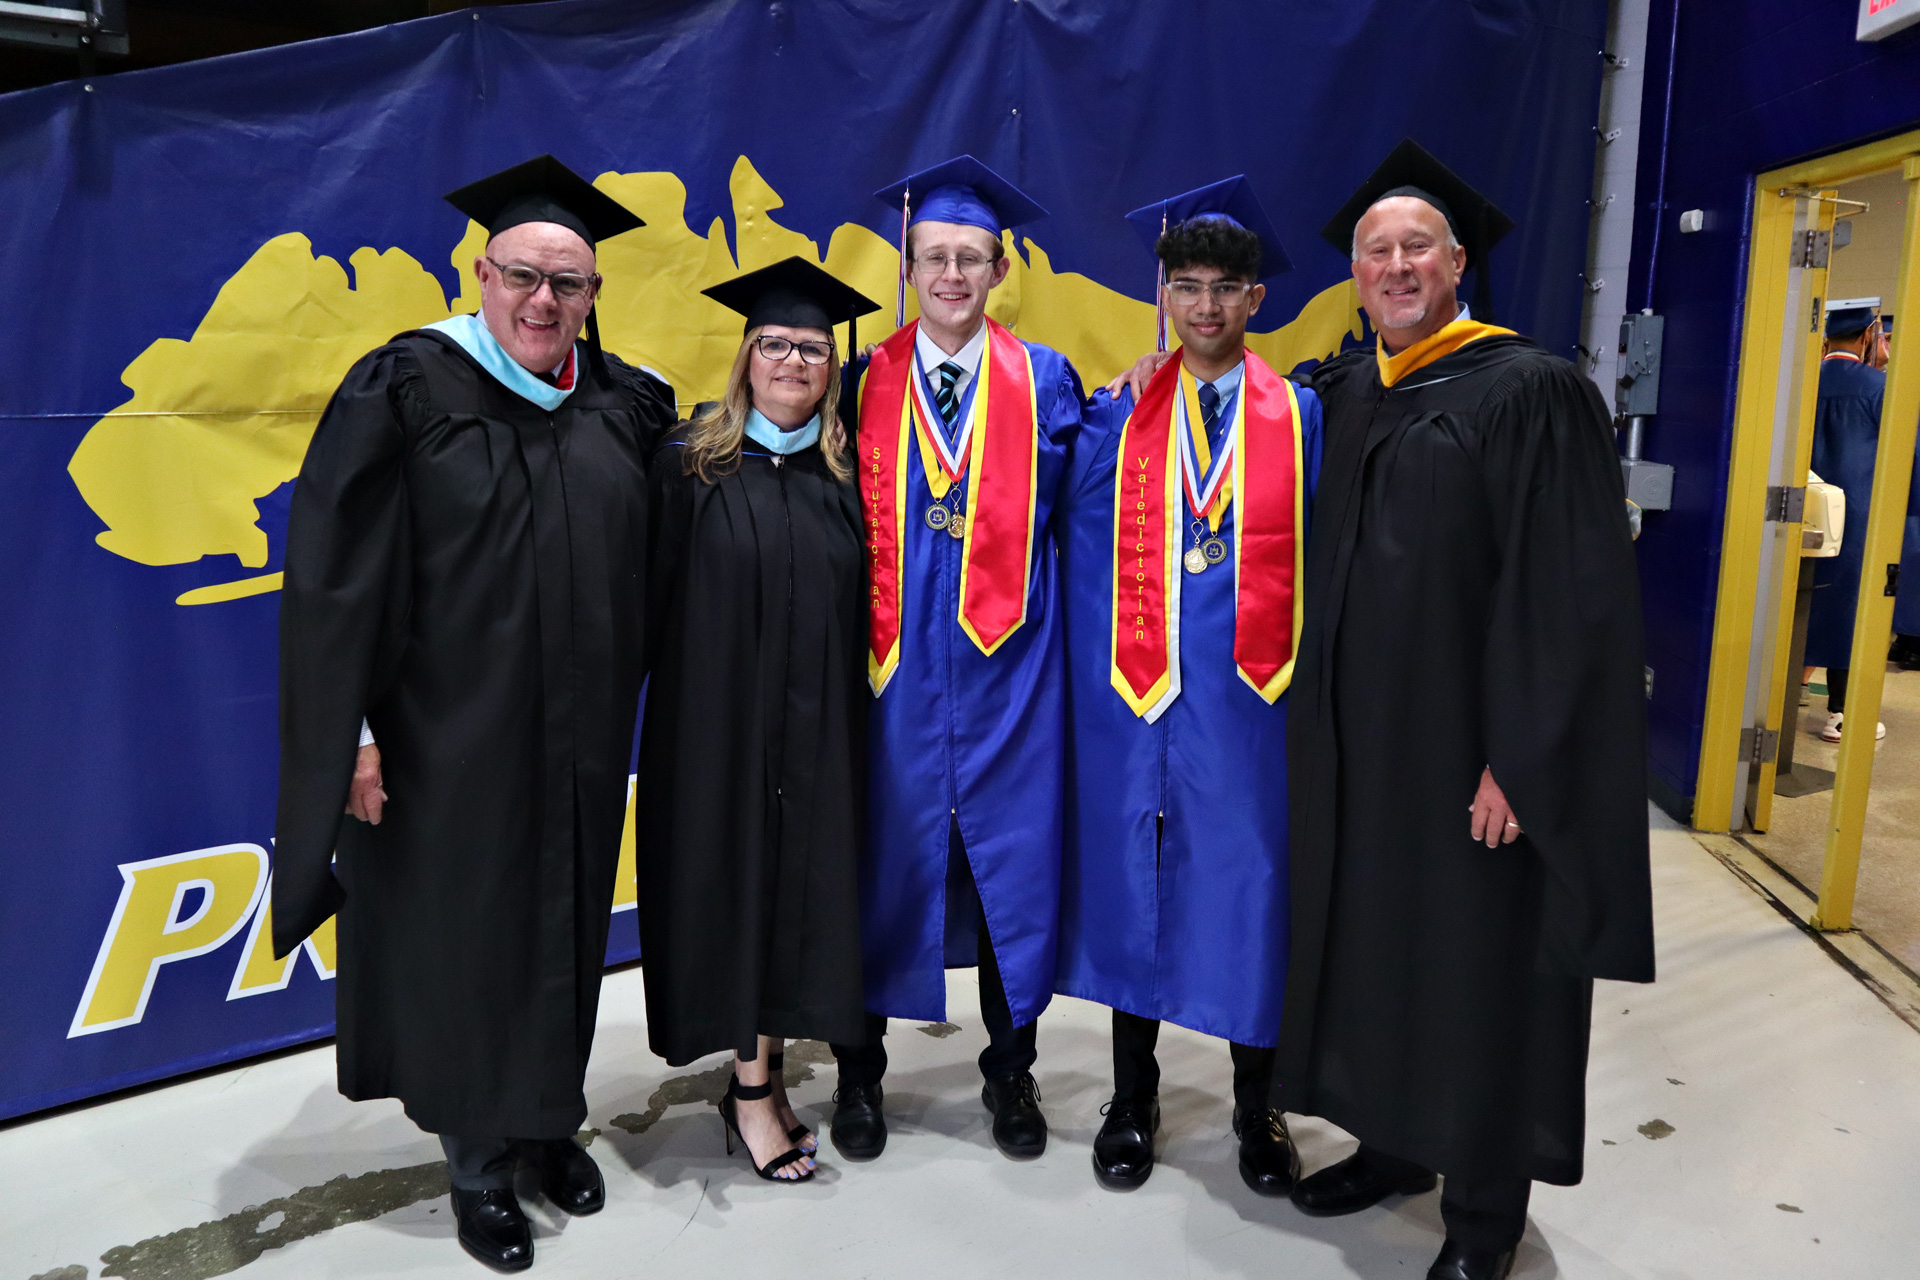 General Douglas MacArthur High School salutatorian Benjamin Campbell and valedictorian Zarif Jamal stood with Assistant Principals Terence Ryan and Anne Rao and Principal Joseph Sheehan before the commencement ceremony on June 22.